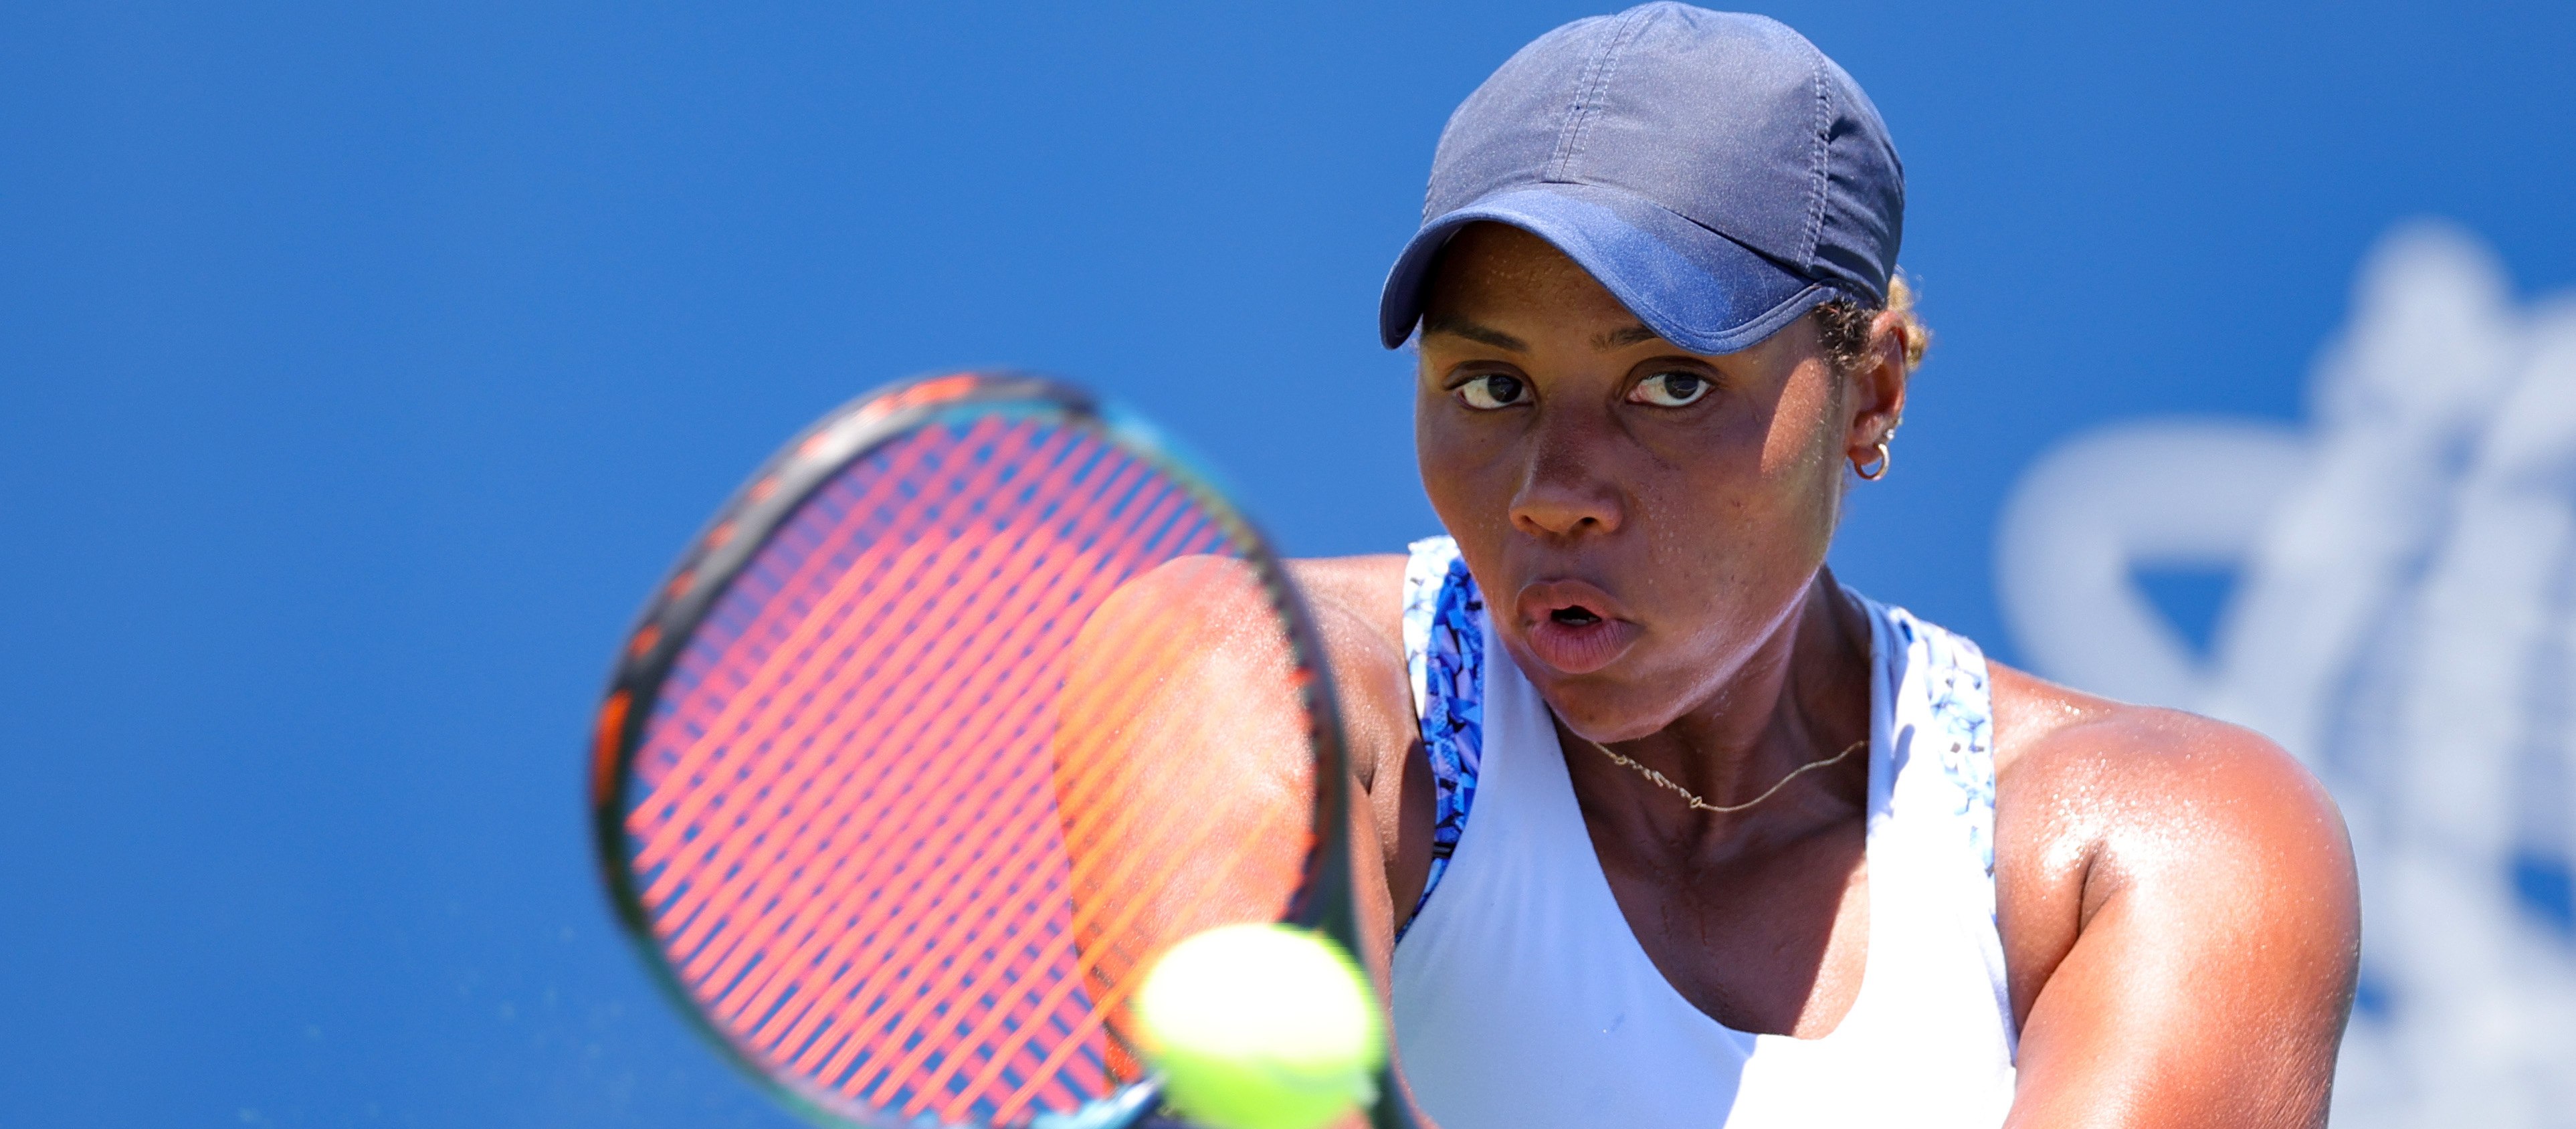 Tennis Channel Inside-In Taylor Townsend Is Reclaiming Her Spot In The Game